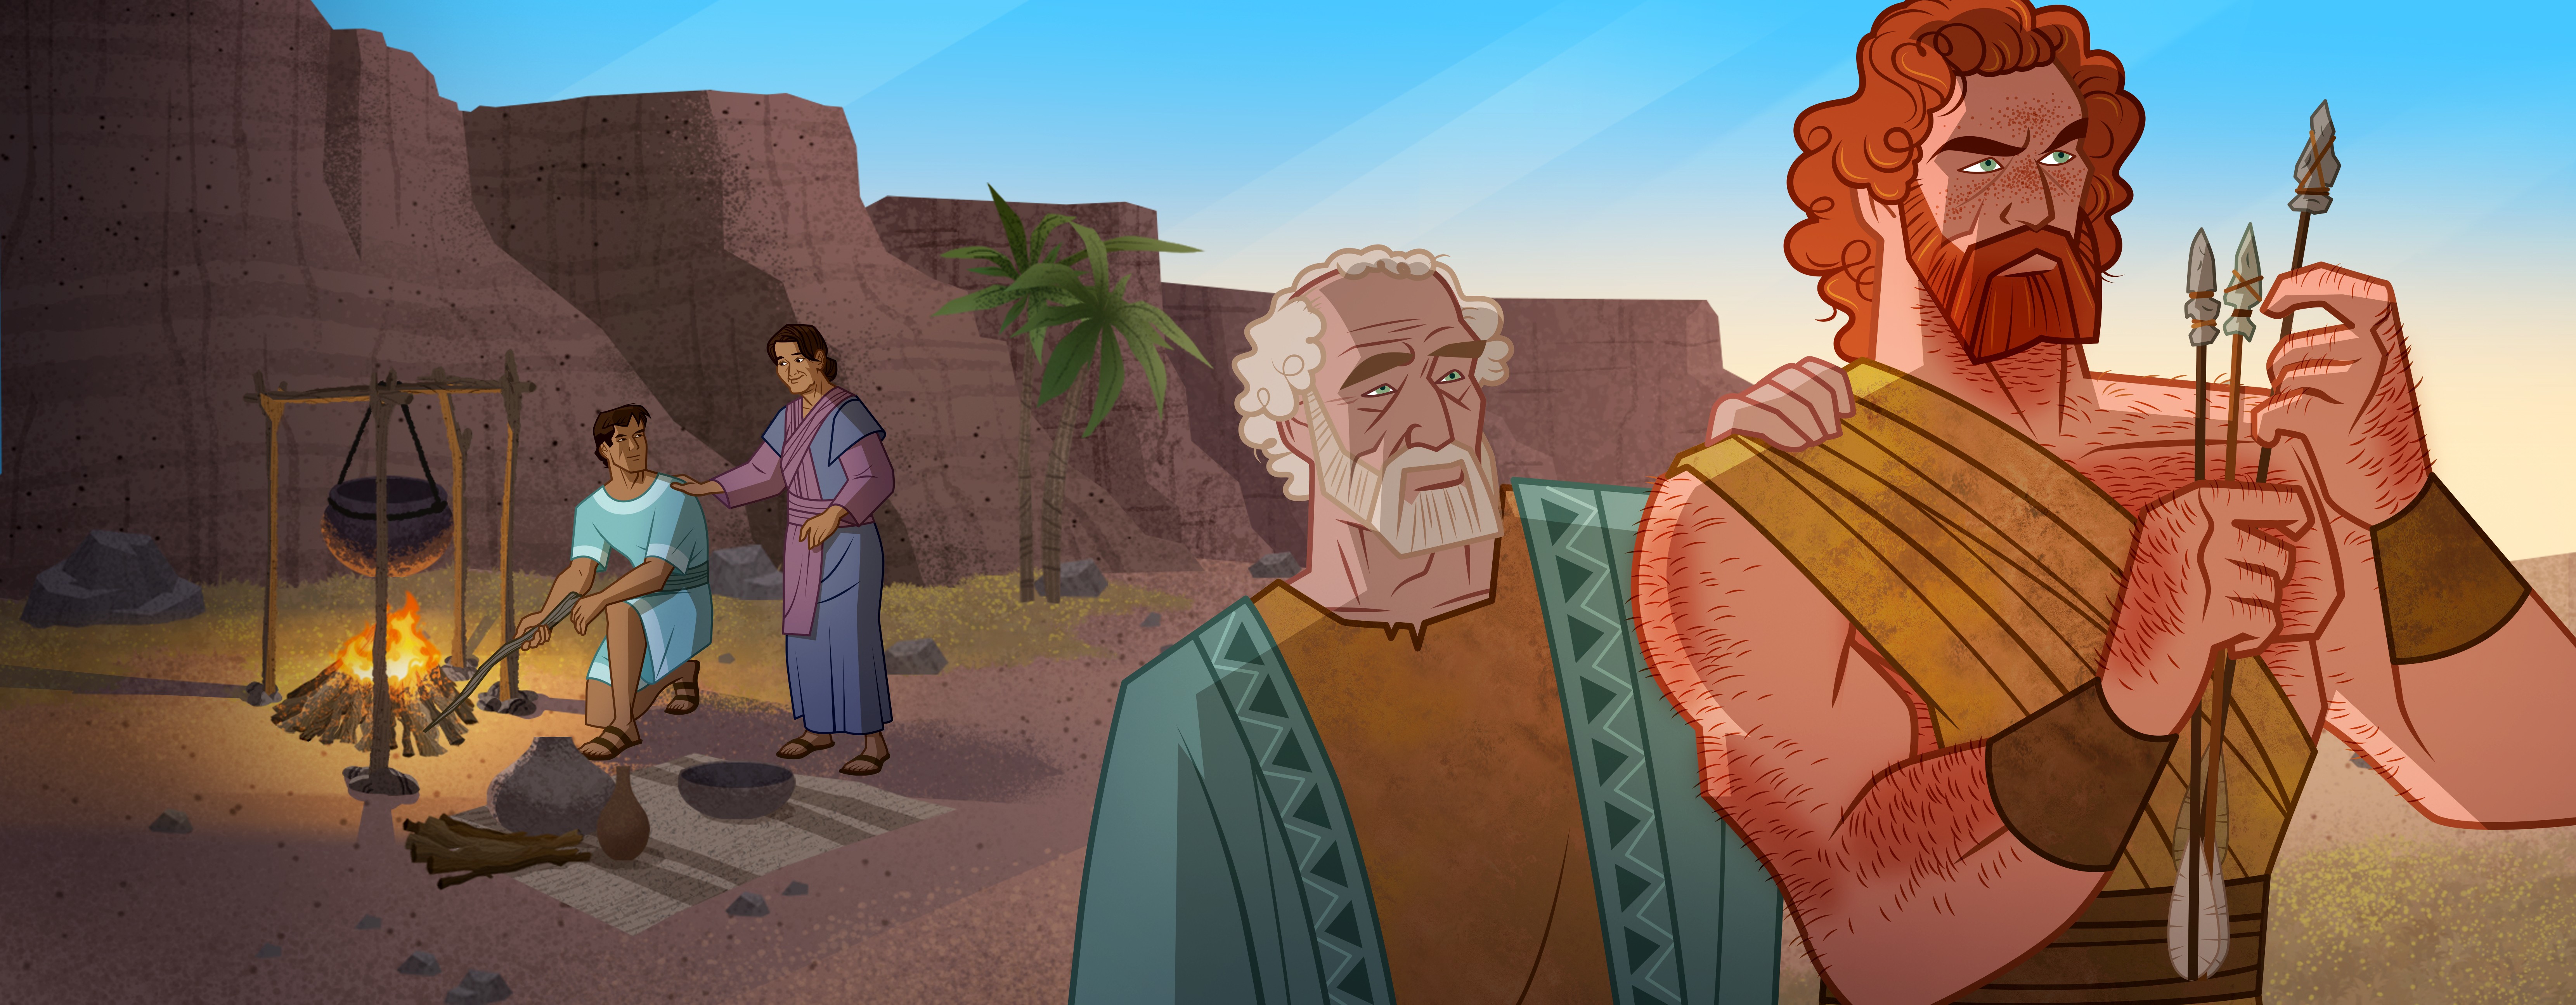 Bible Story Jacob And Esau Clip Art Set Educlips Clipart By Educlips ...